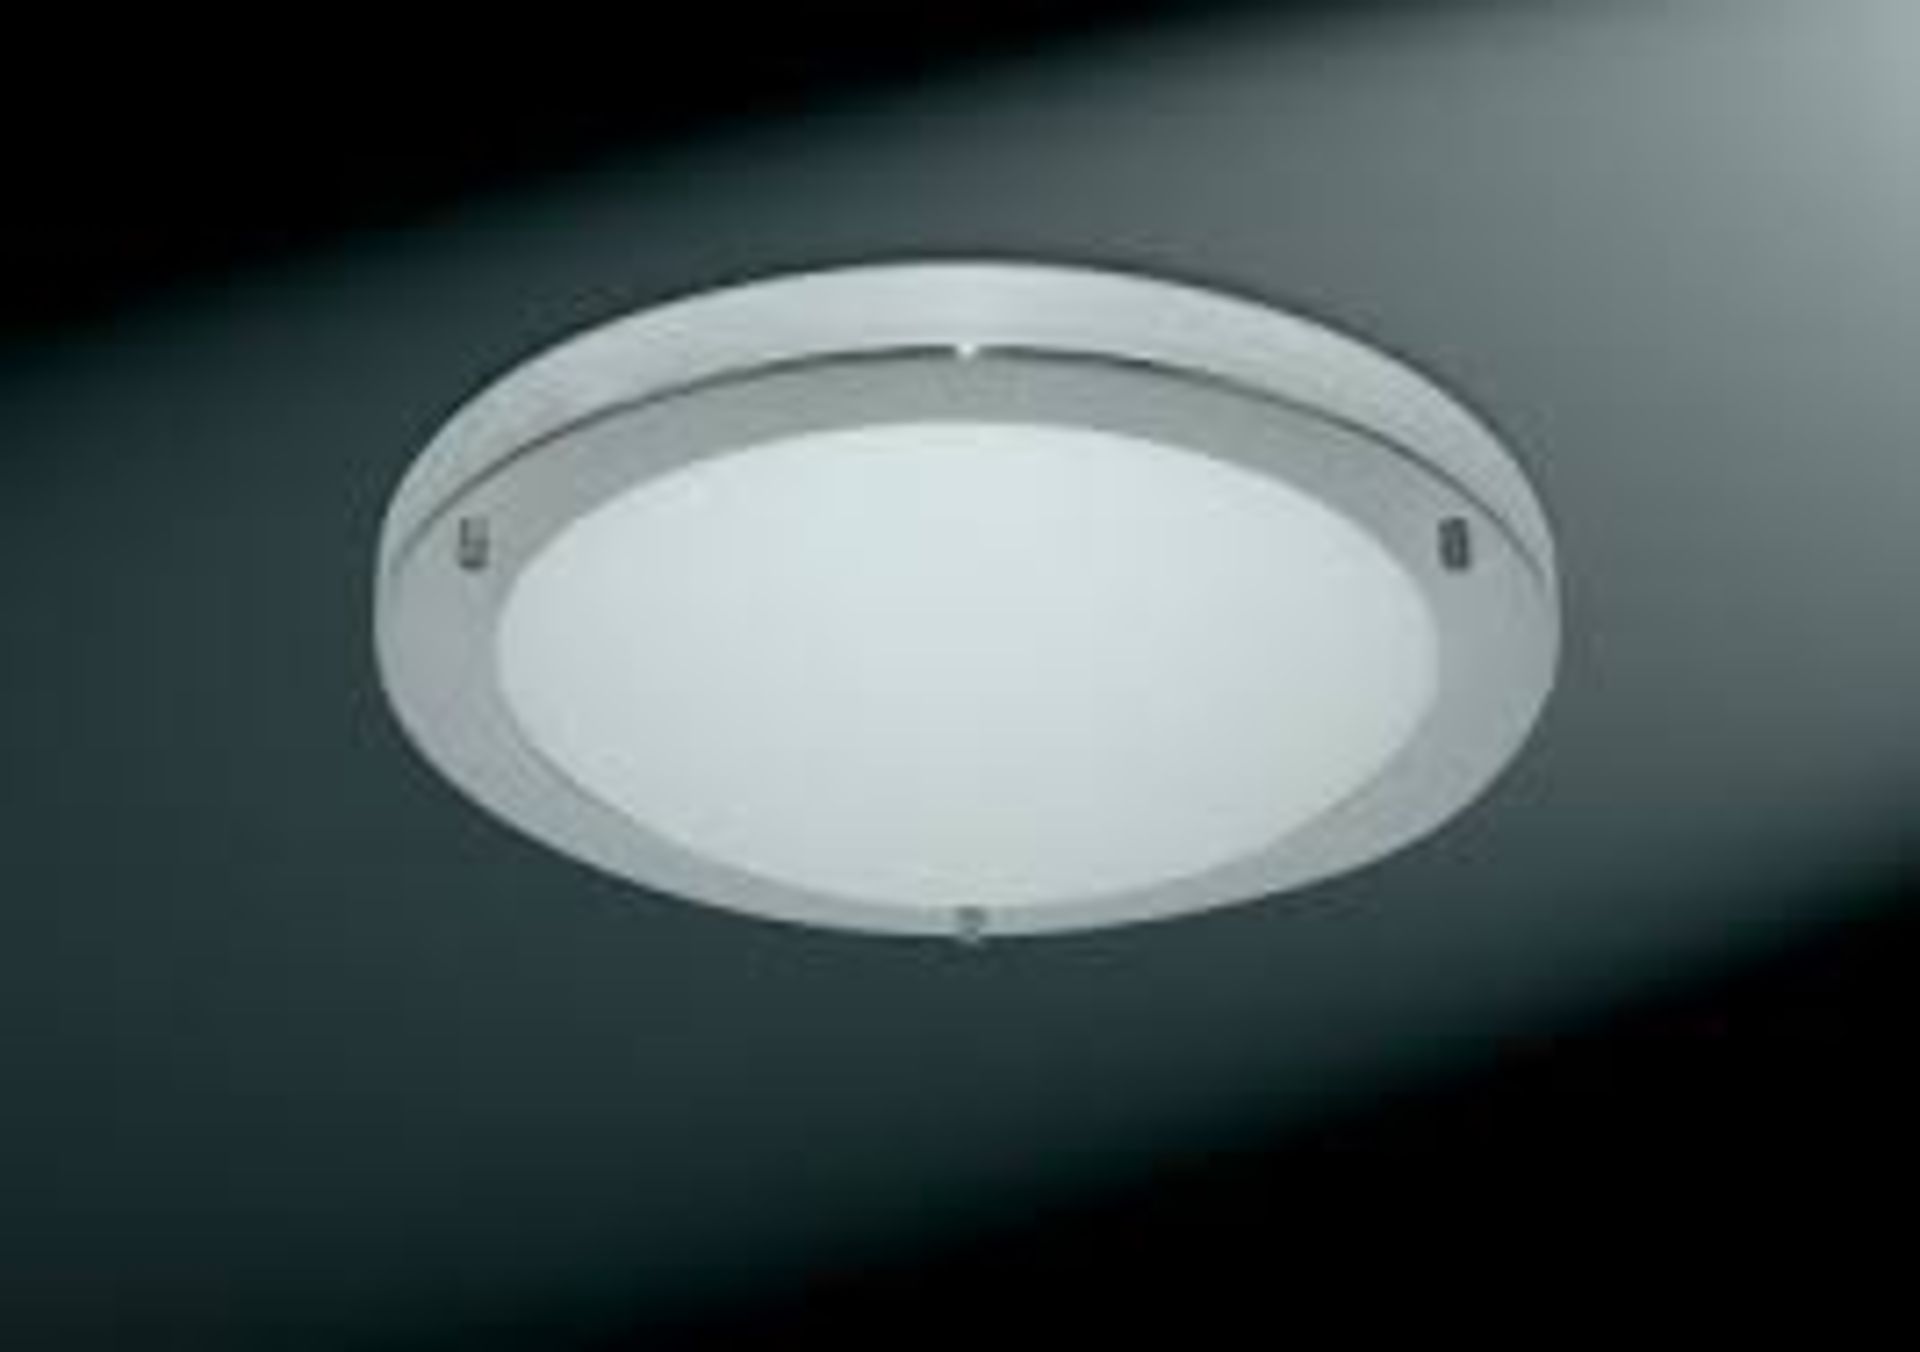 1 x Searchlight bathroom Flush in a satin silver finish - Ref: 10632SS - New and Boxed - RRP: £60.00 - Image 3 of 4